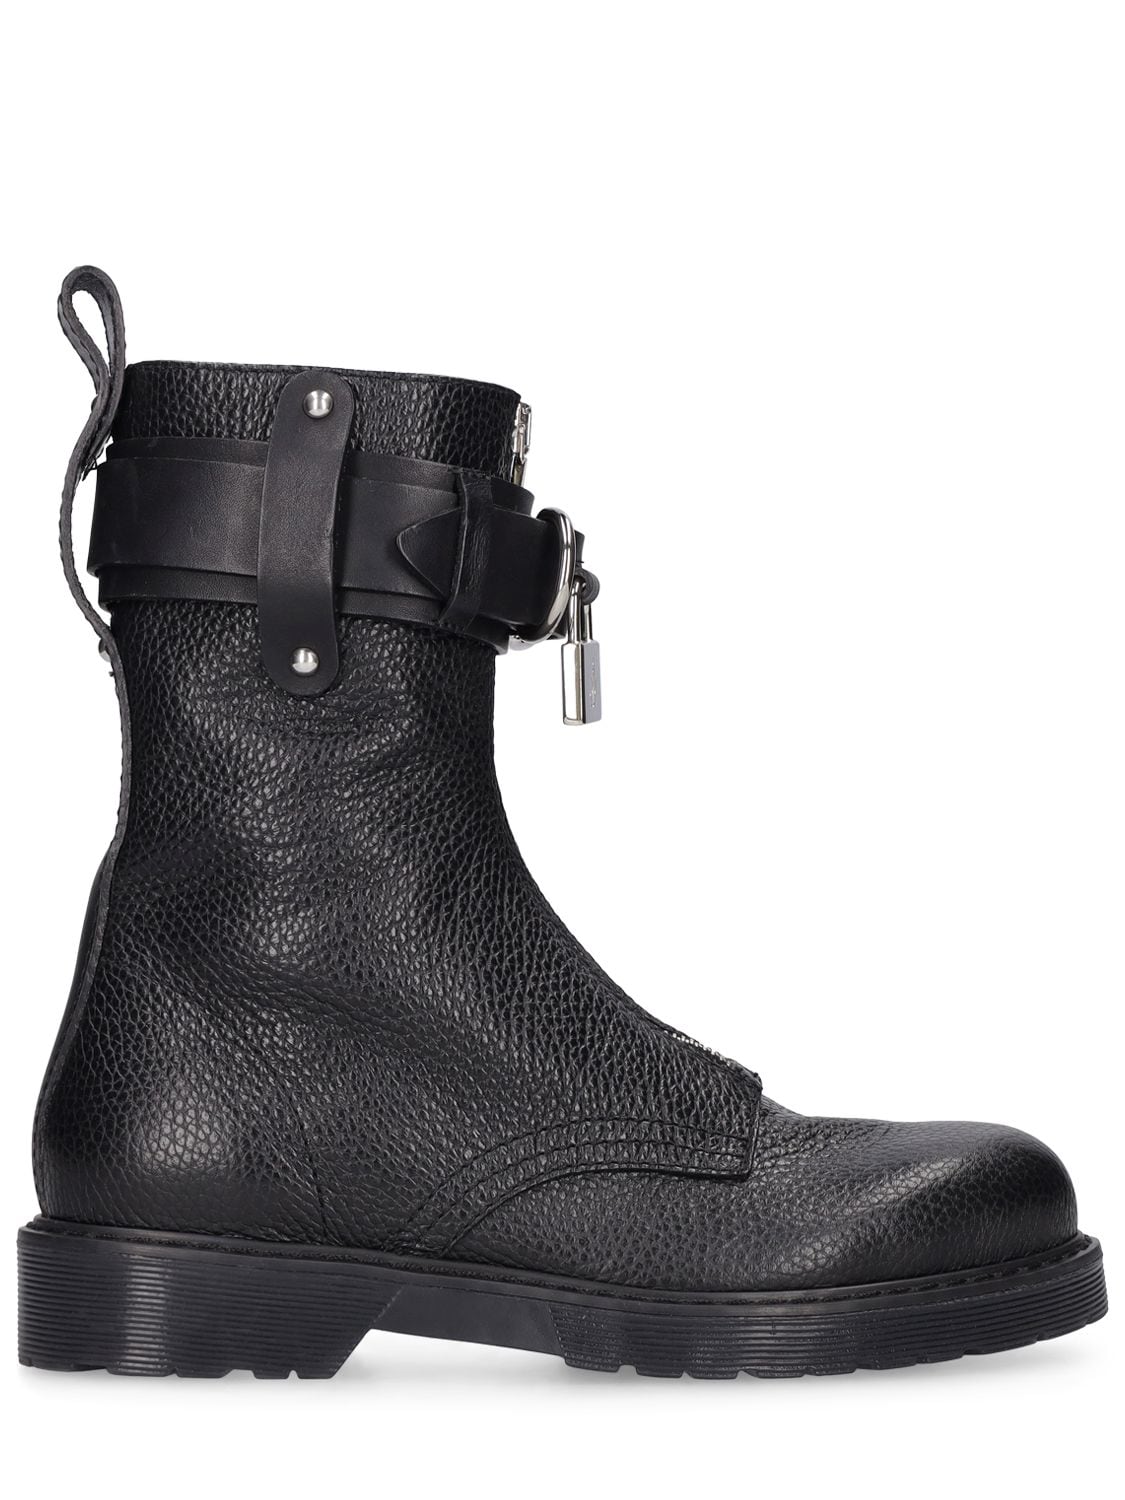 JW ANDERSON 25MM PUNK COMBAT LEATHER ANKLE BOOTS